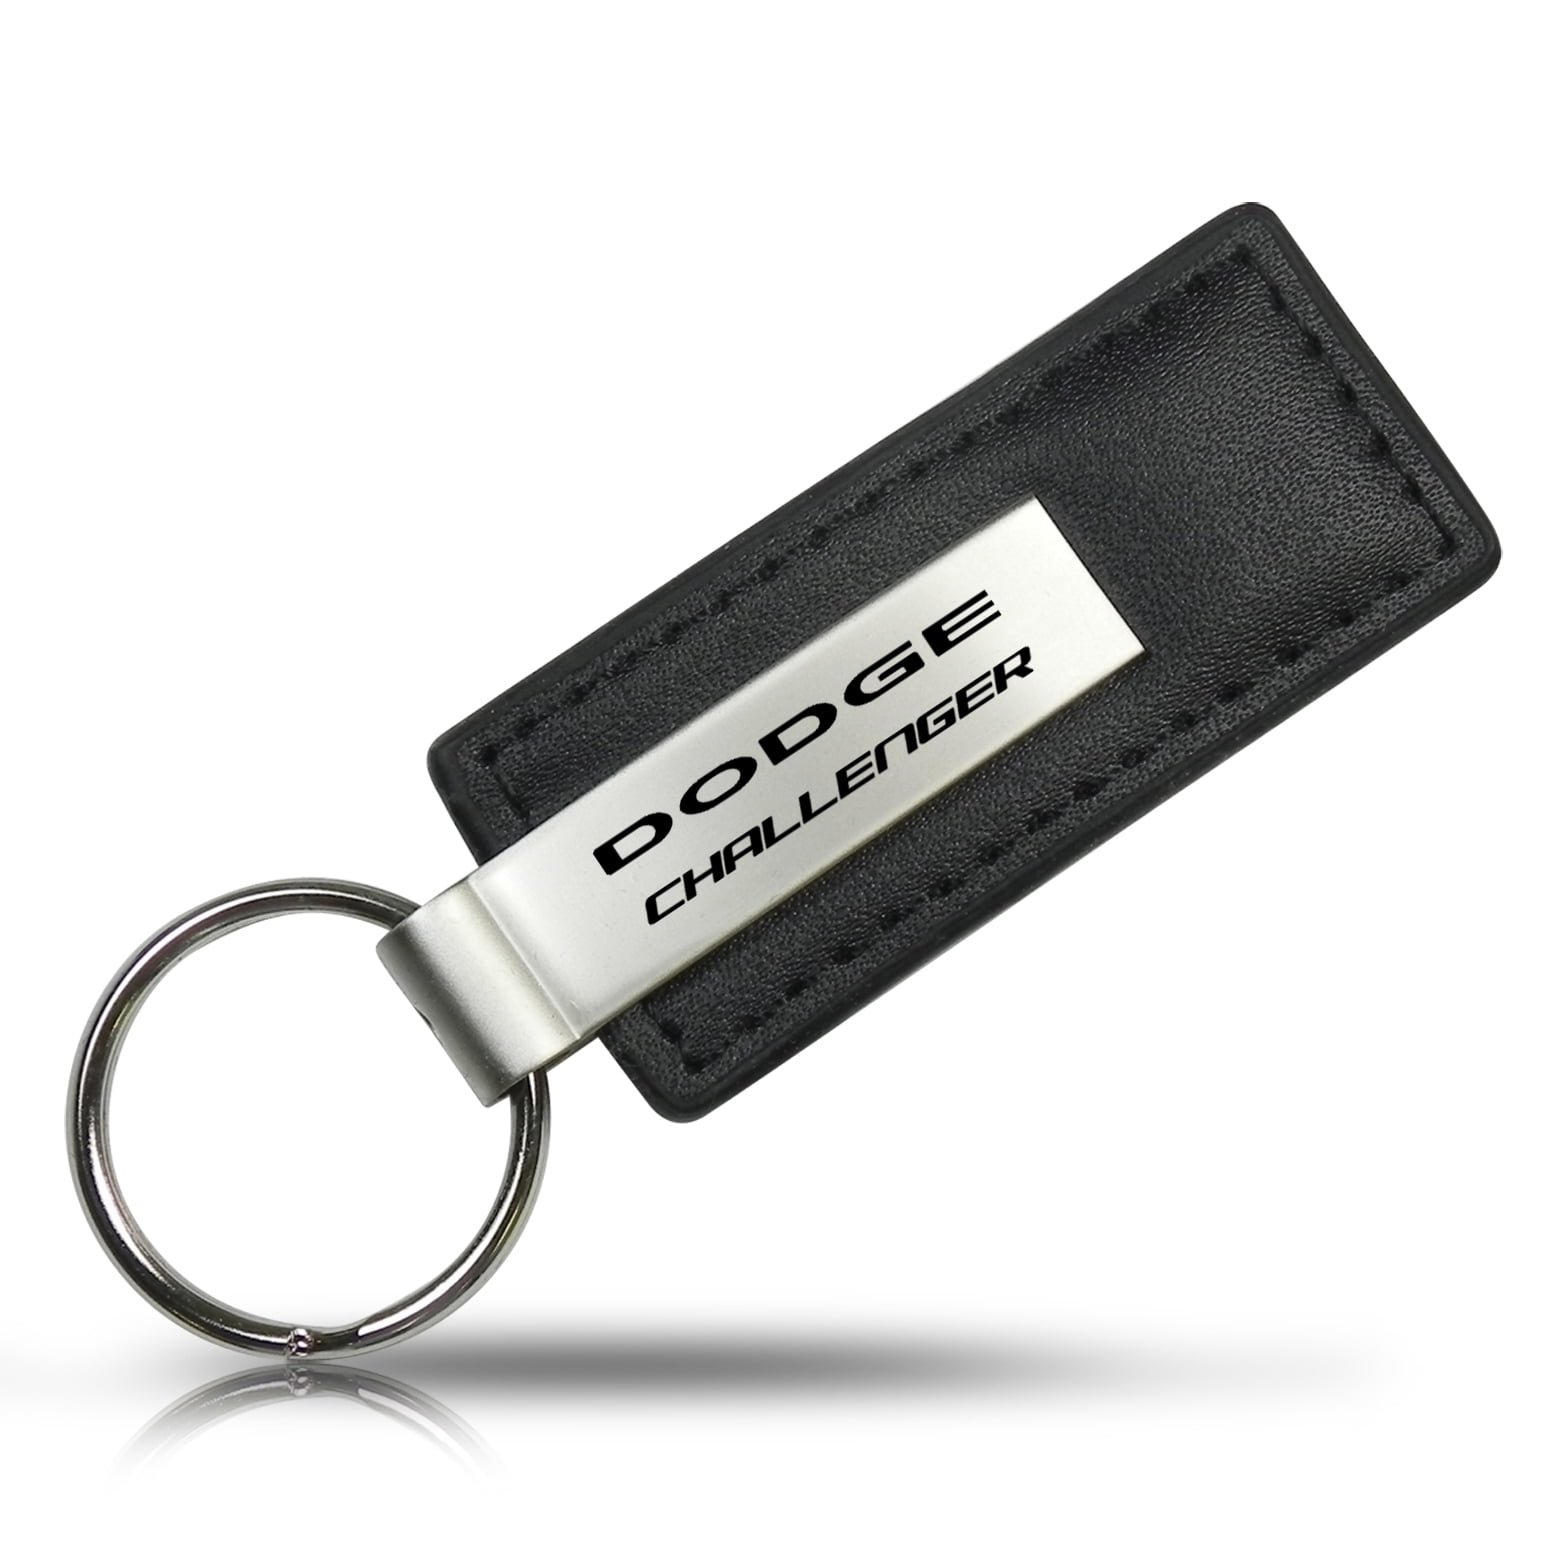 Dodge Challenger R/T Classic Genuine Black Leather Strap Loop Key Chain iPick Image for 